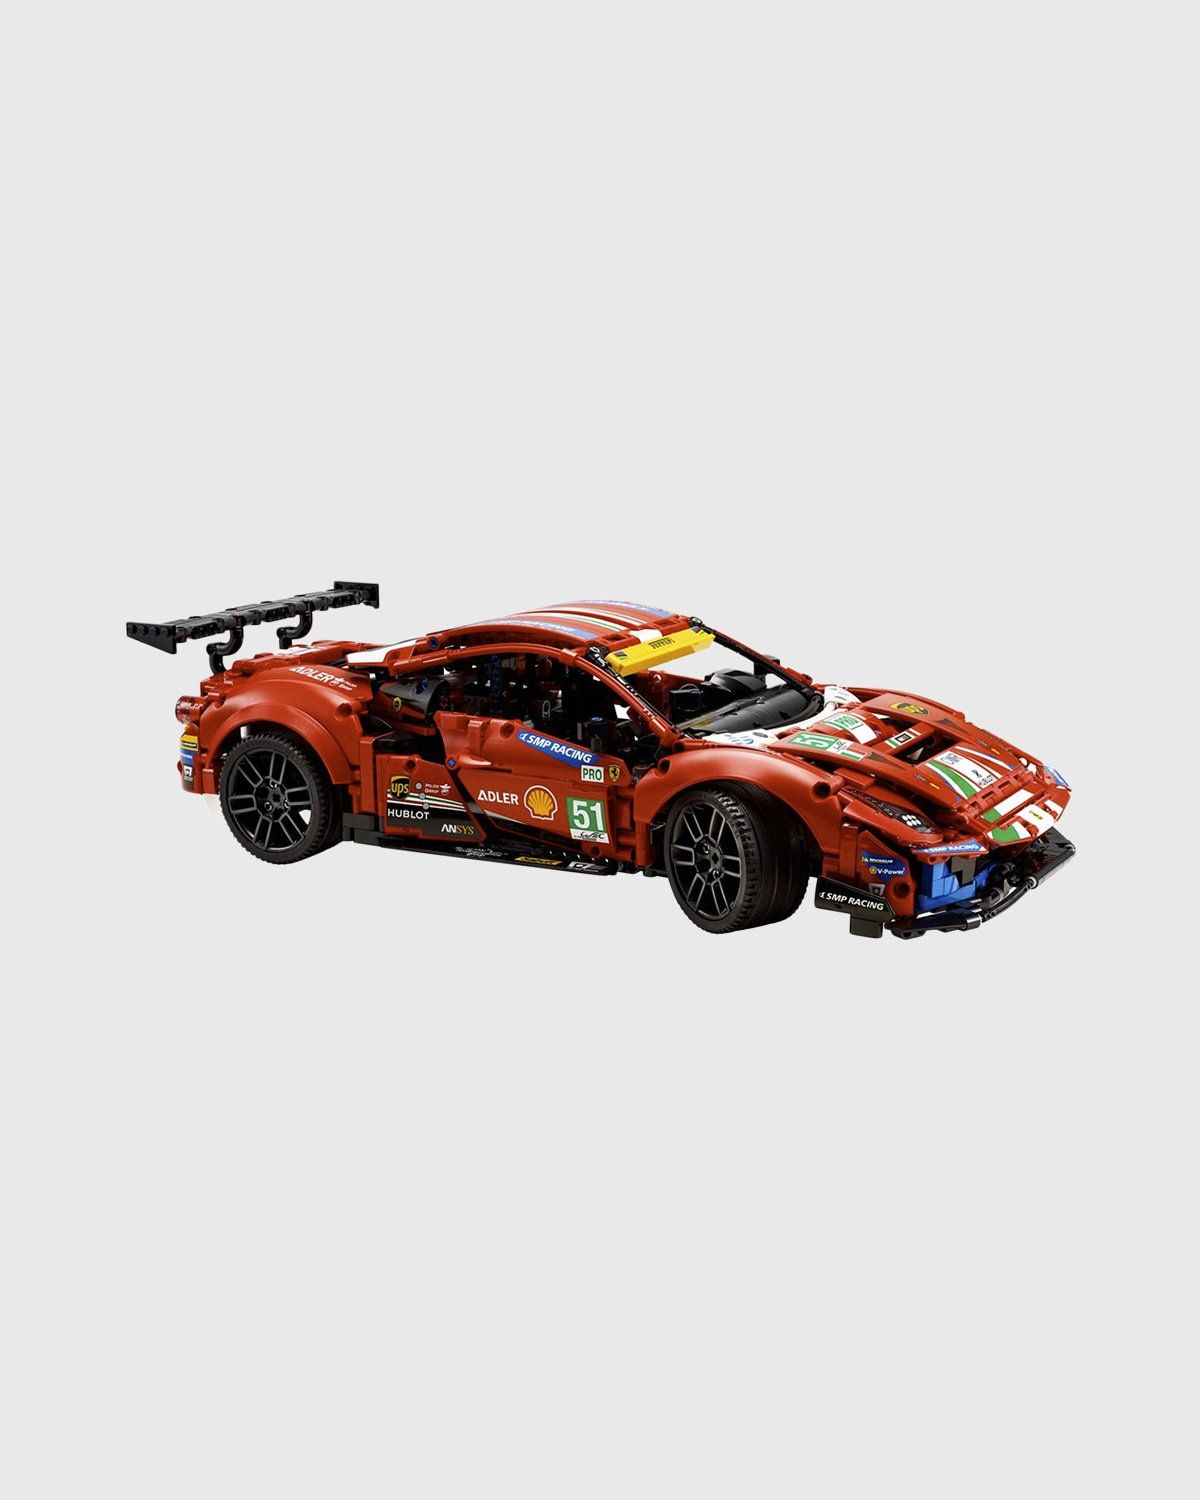 Lego – Technic Ferrari 488 GTE AF Corse 51 Red - Arts & Collectibles - Red - Image 1